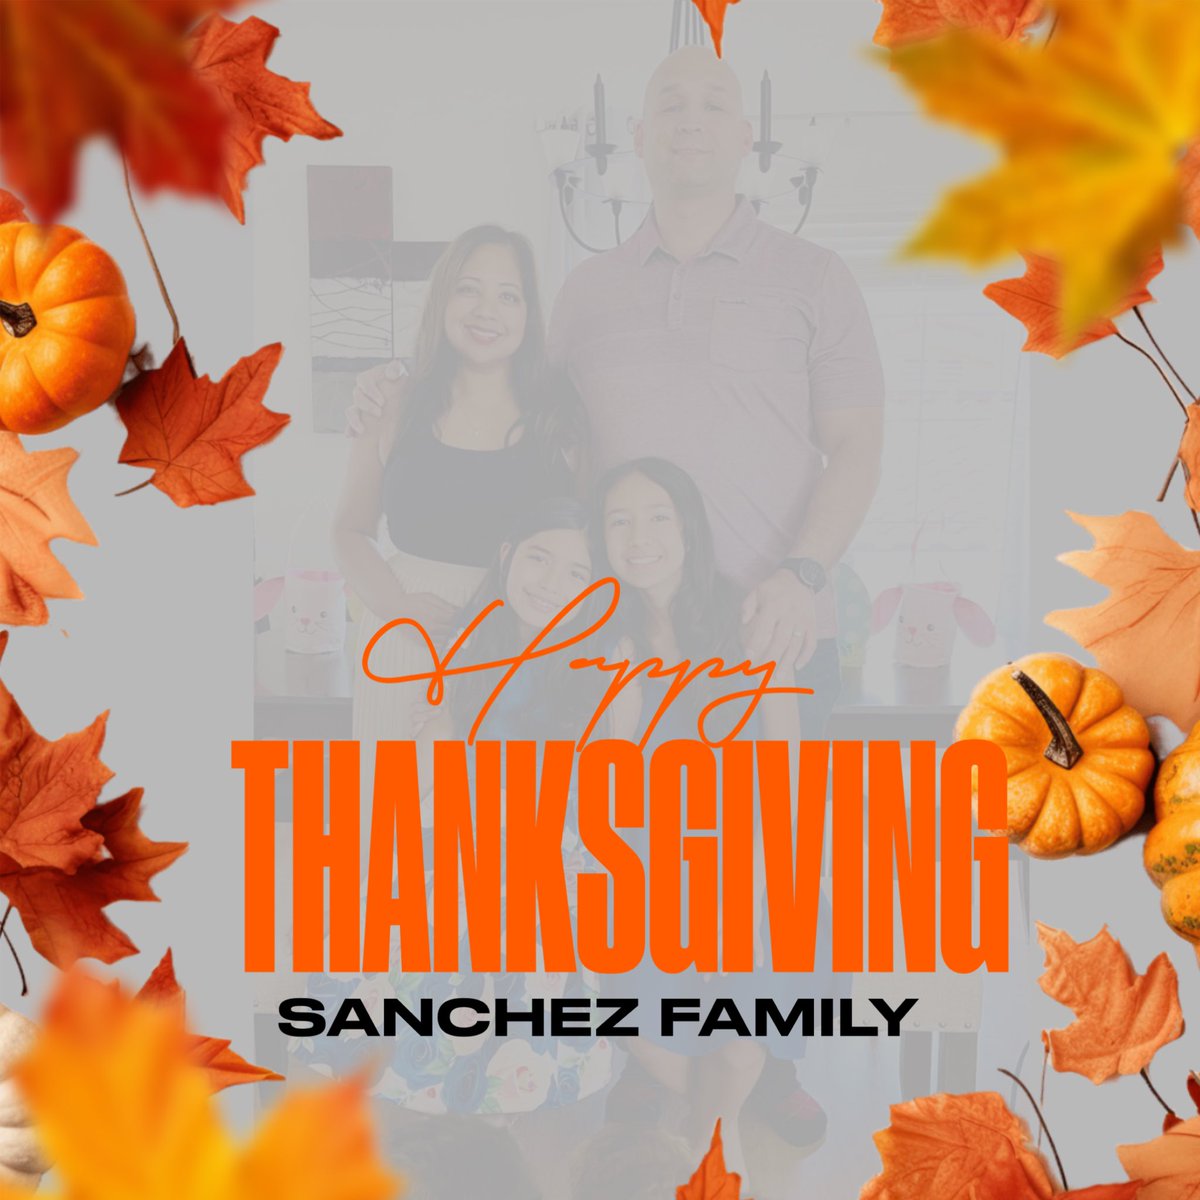 May today help you remember that you are a blessing to others. Always remember that you inspire someone, so keep getting better. From my family to yours, Happy Thanksgiving. Blessings to all!